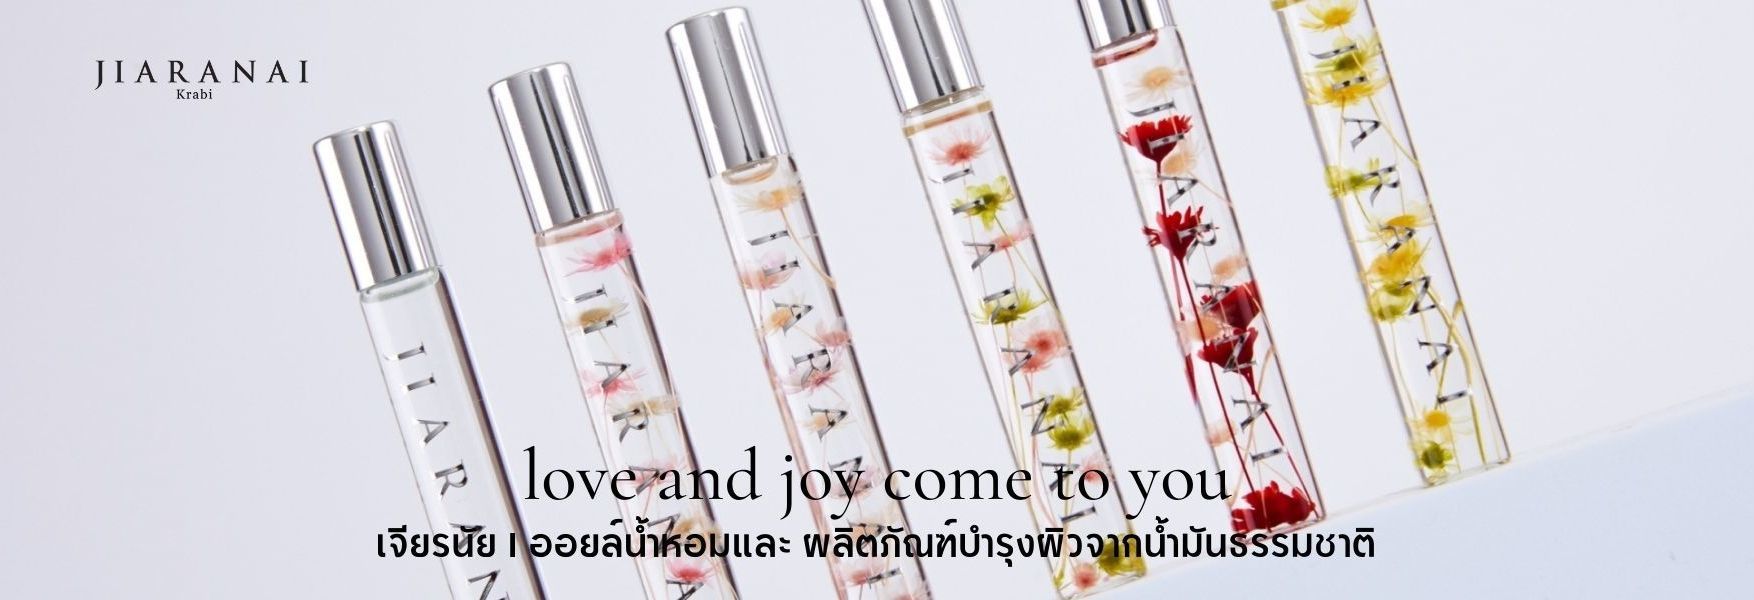 natural-perfume-oil-gift-for-friend-from-Krabi-Thailand